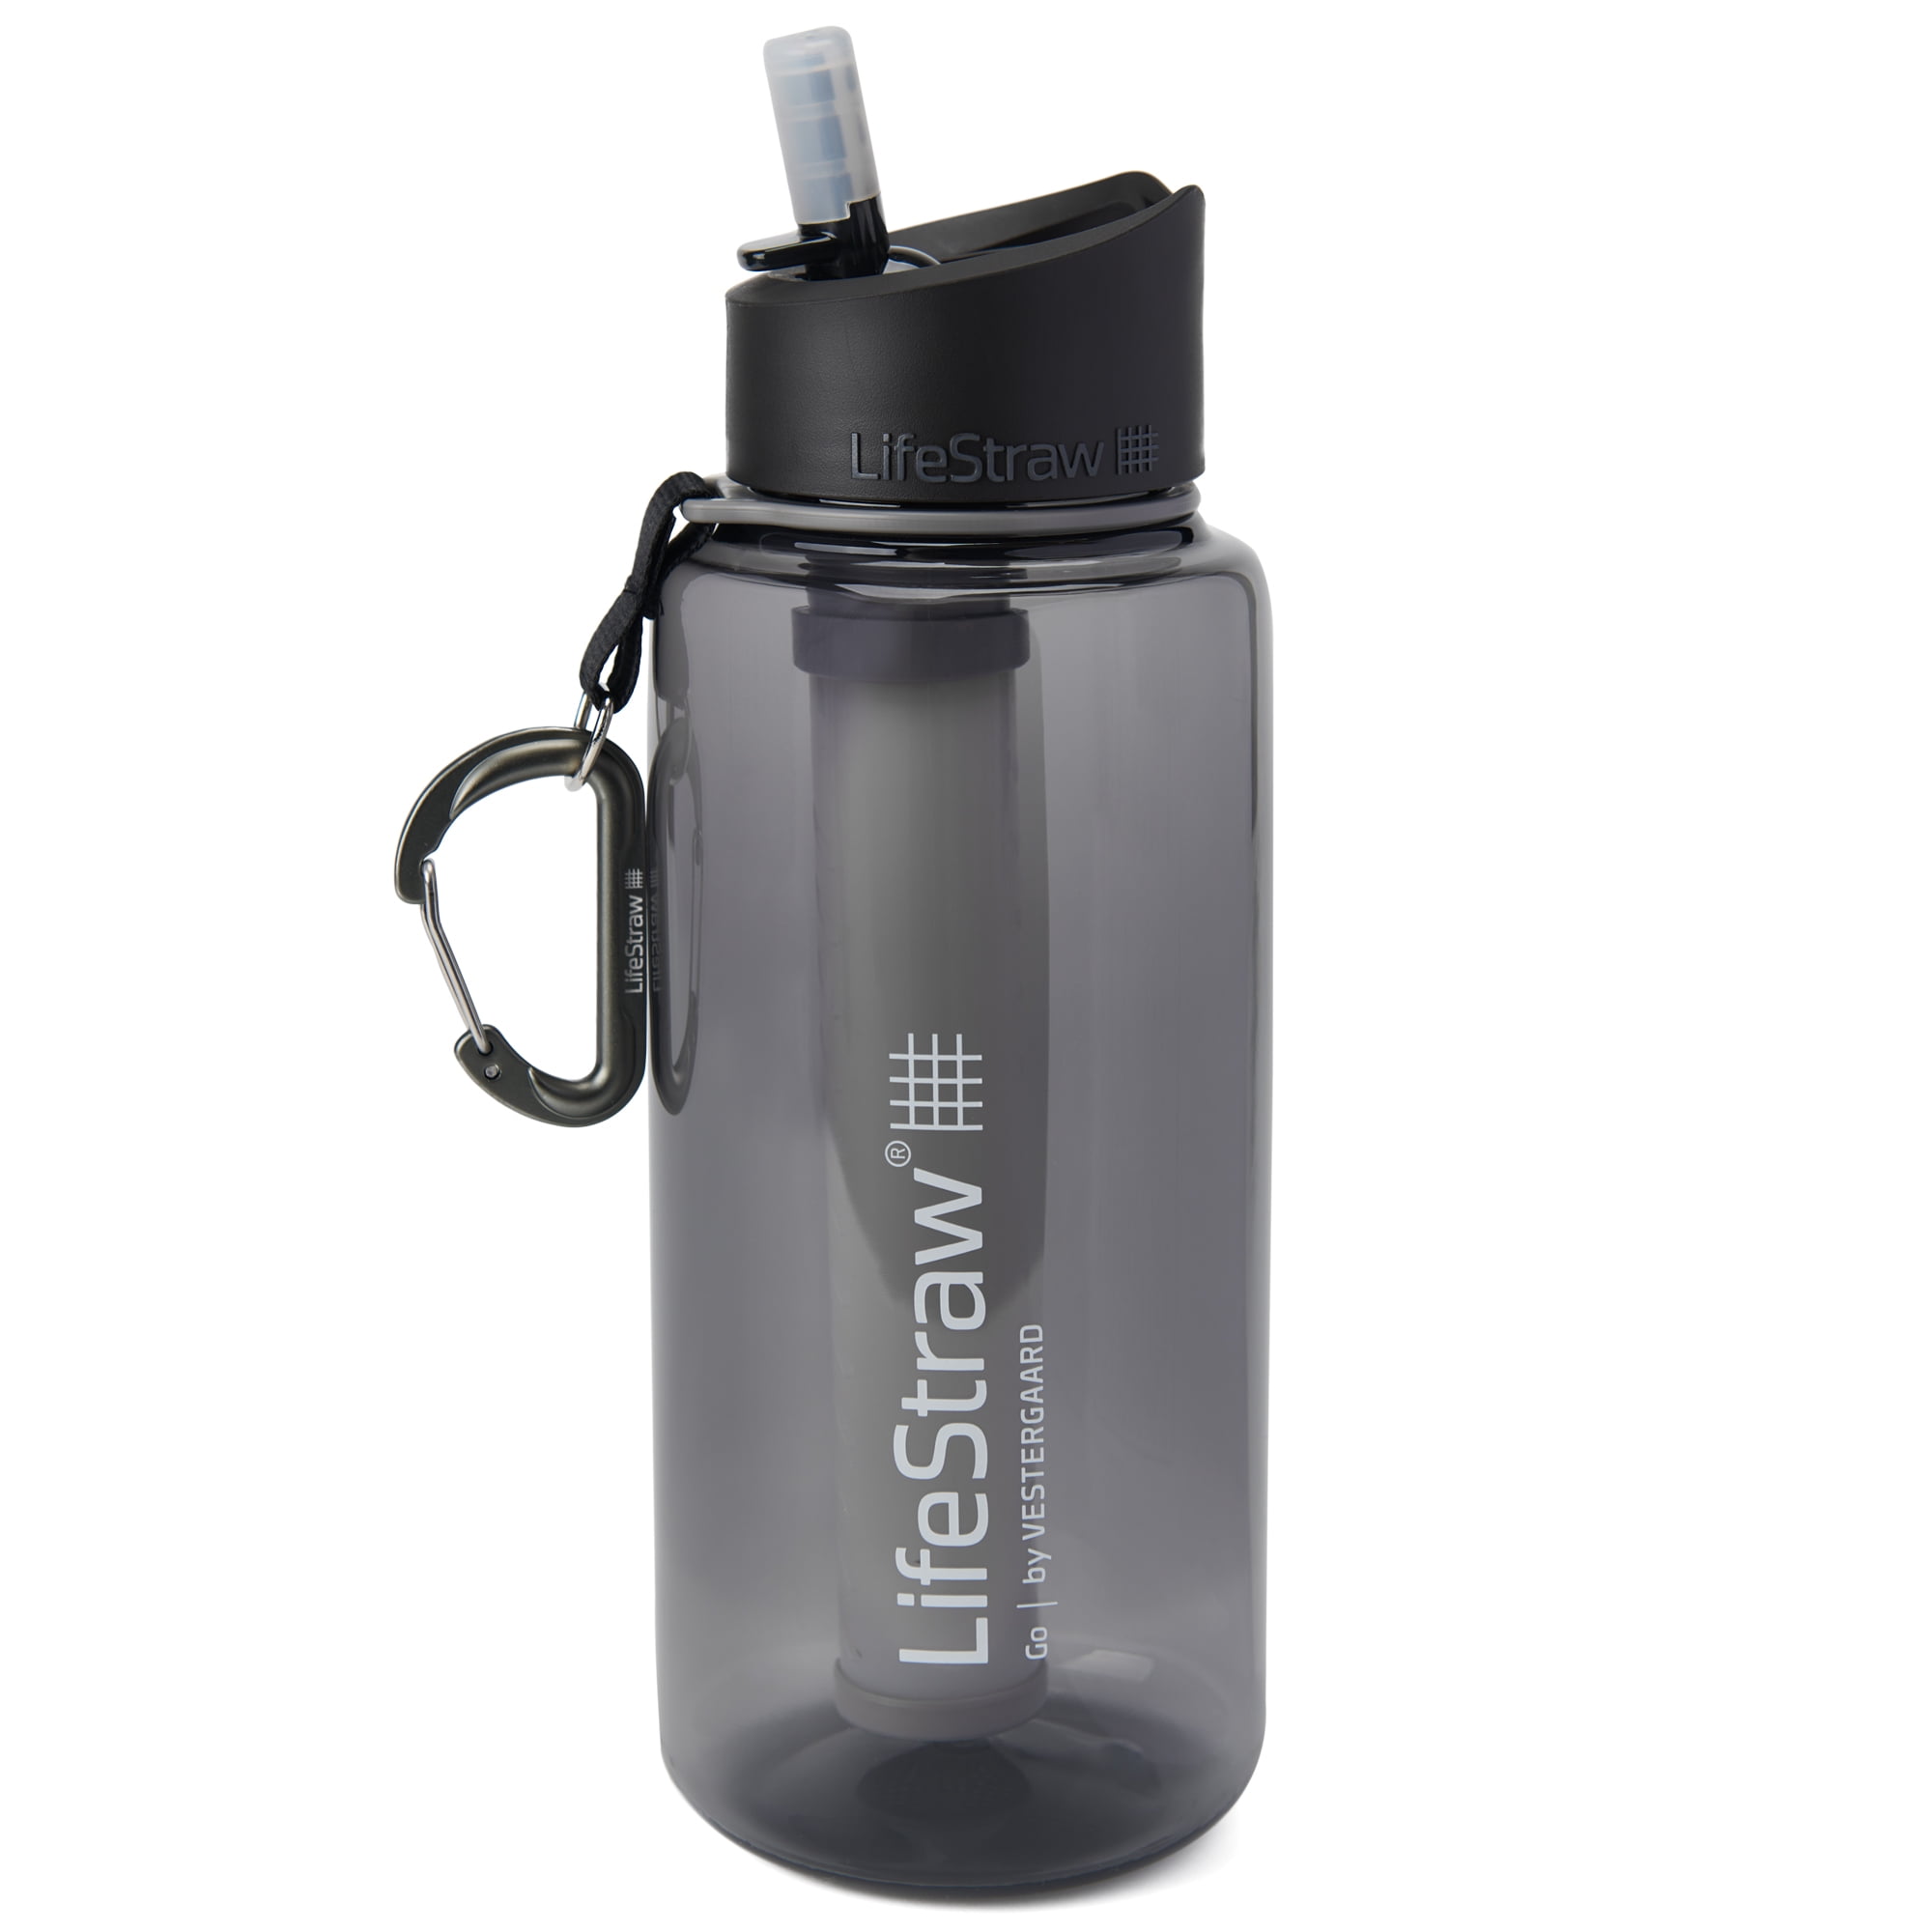  LifeStraw Go Series – BPA-Free Water Filter Bottle for Travel  and Everyday Use Removes Bacteria, Parasites and Microplastics, Improves  Taste, 1L Aegean Sea : Sports & Outdoors